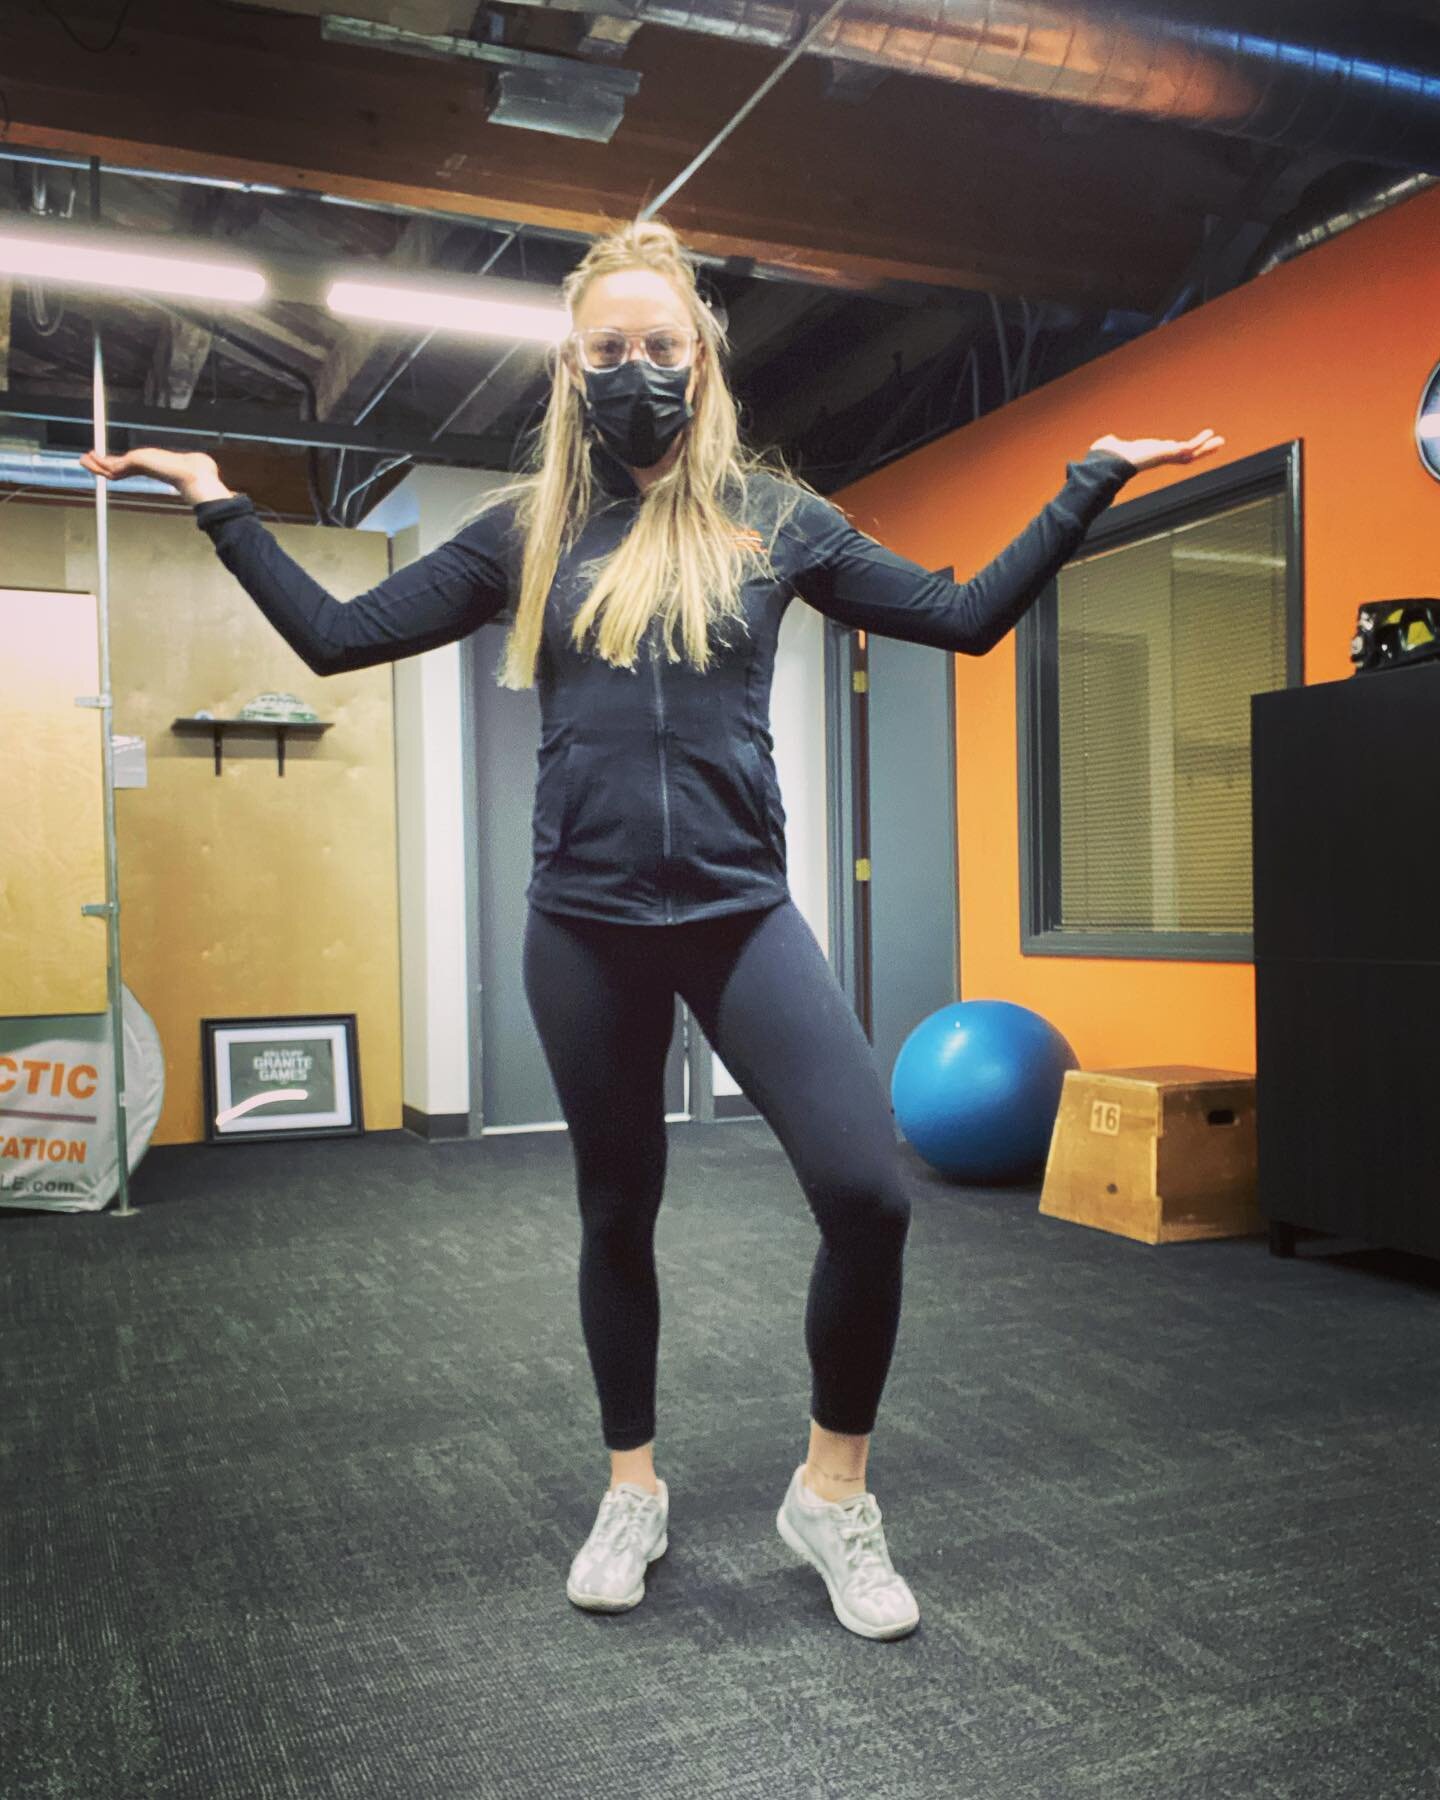 Feeling like your local #chiropractic cheerleader this morning! 🤣 RA RA RA! 

At #seattlesportschiropractic we have four sports chiropractors and three massage therapists to help get you back in the gym, out running, or moving pain-free!

Are you re